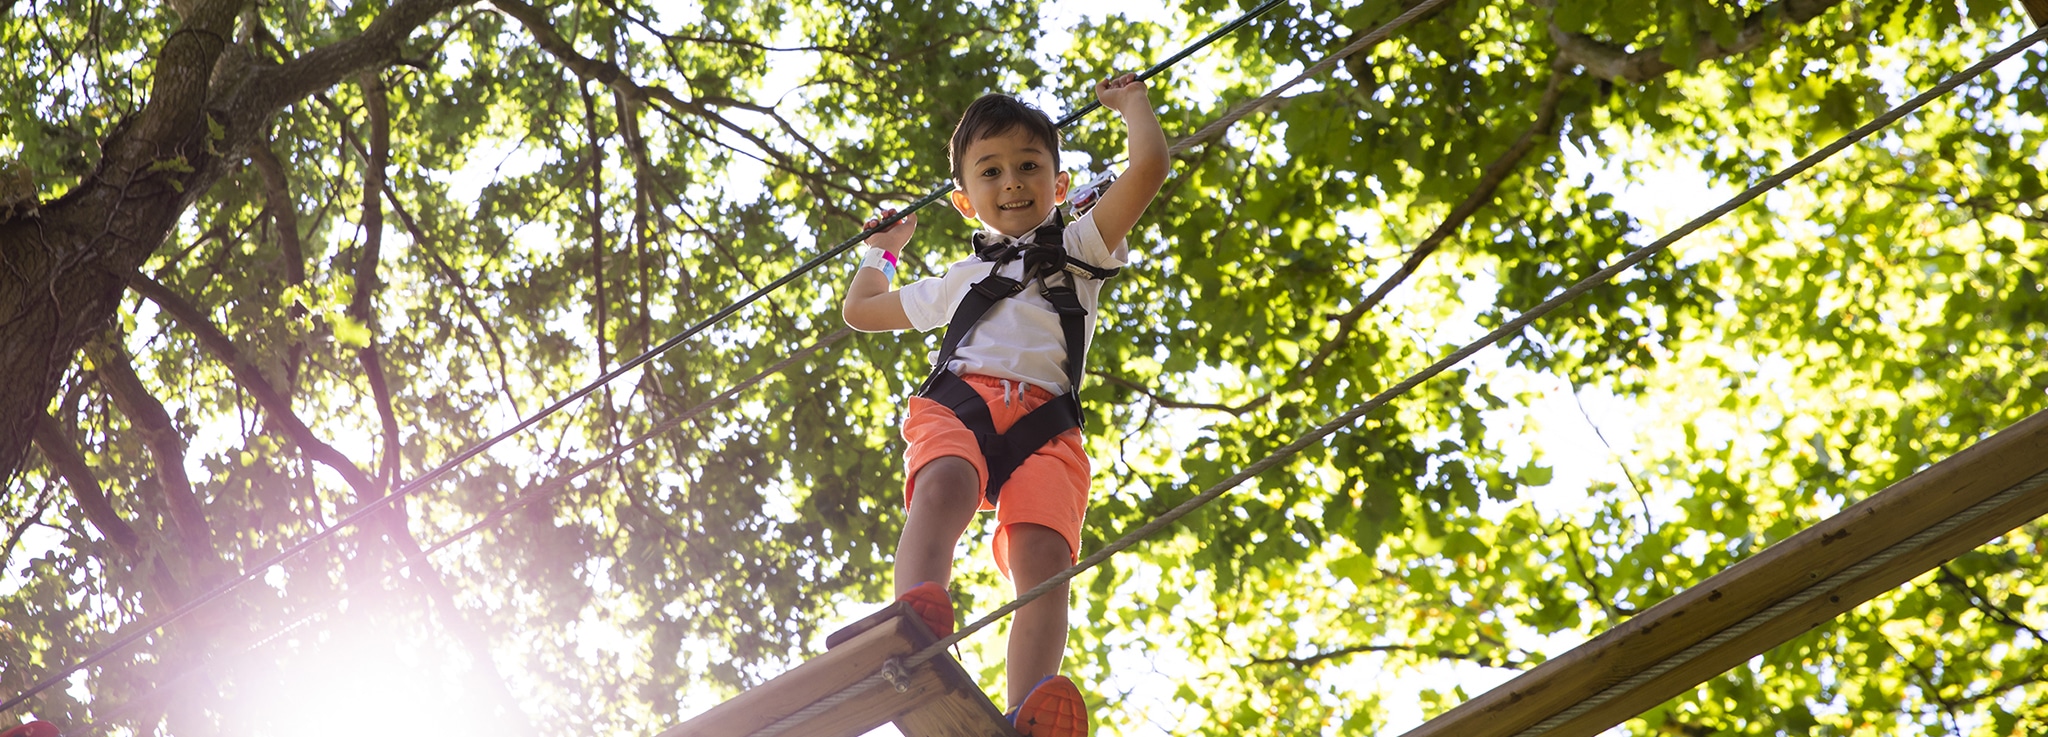 Low angle photo of young boy wearing harness while navigating treetop obstacle and peering down at the photographer